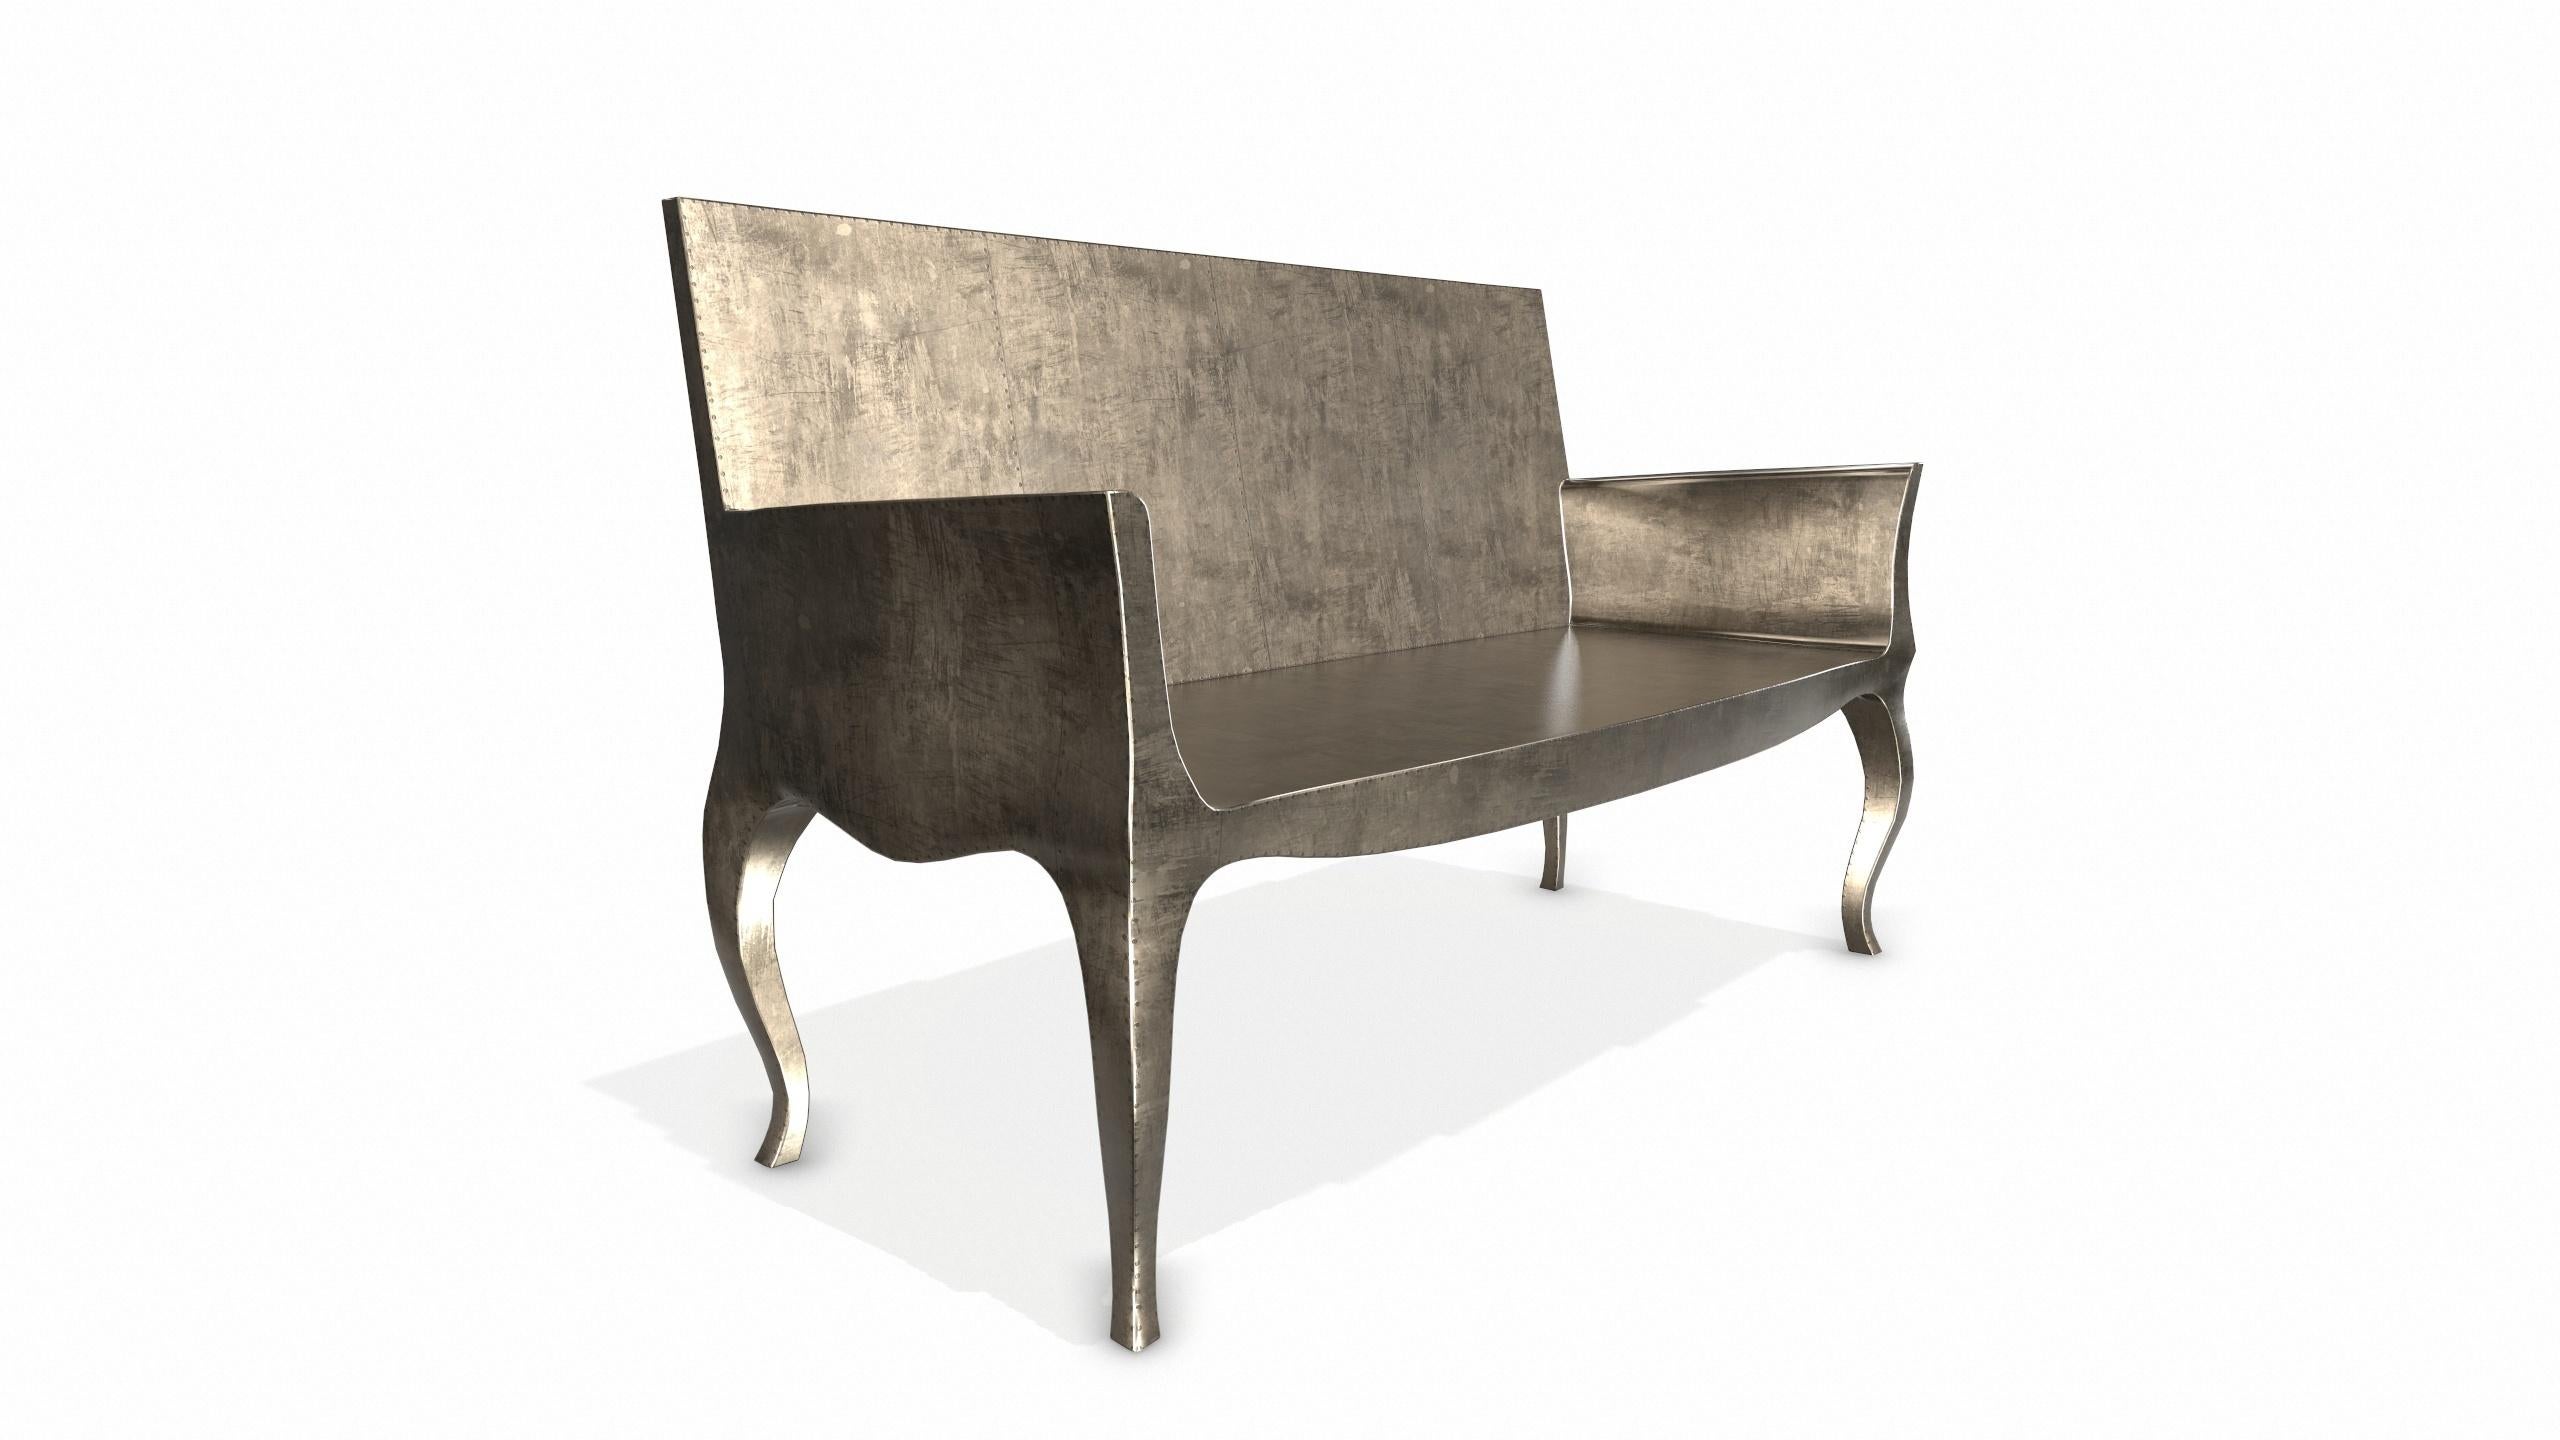 Louise Settee Art Deco Benches in Smooth Antique Bronze by Paul Mathieu In New Condition For Sale In New York, NY